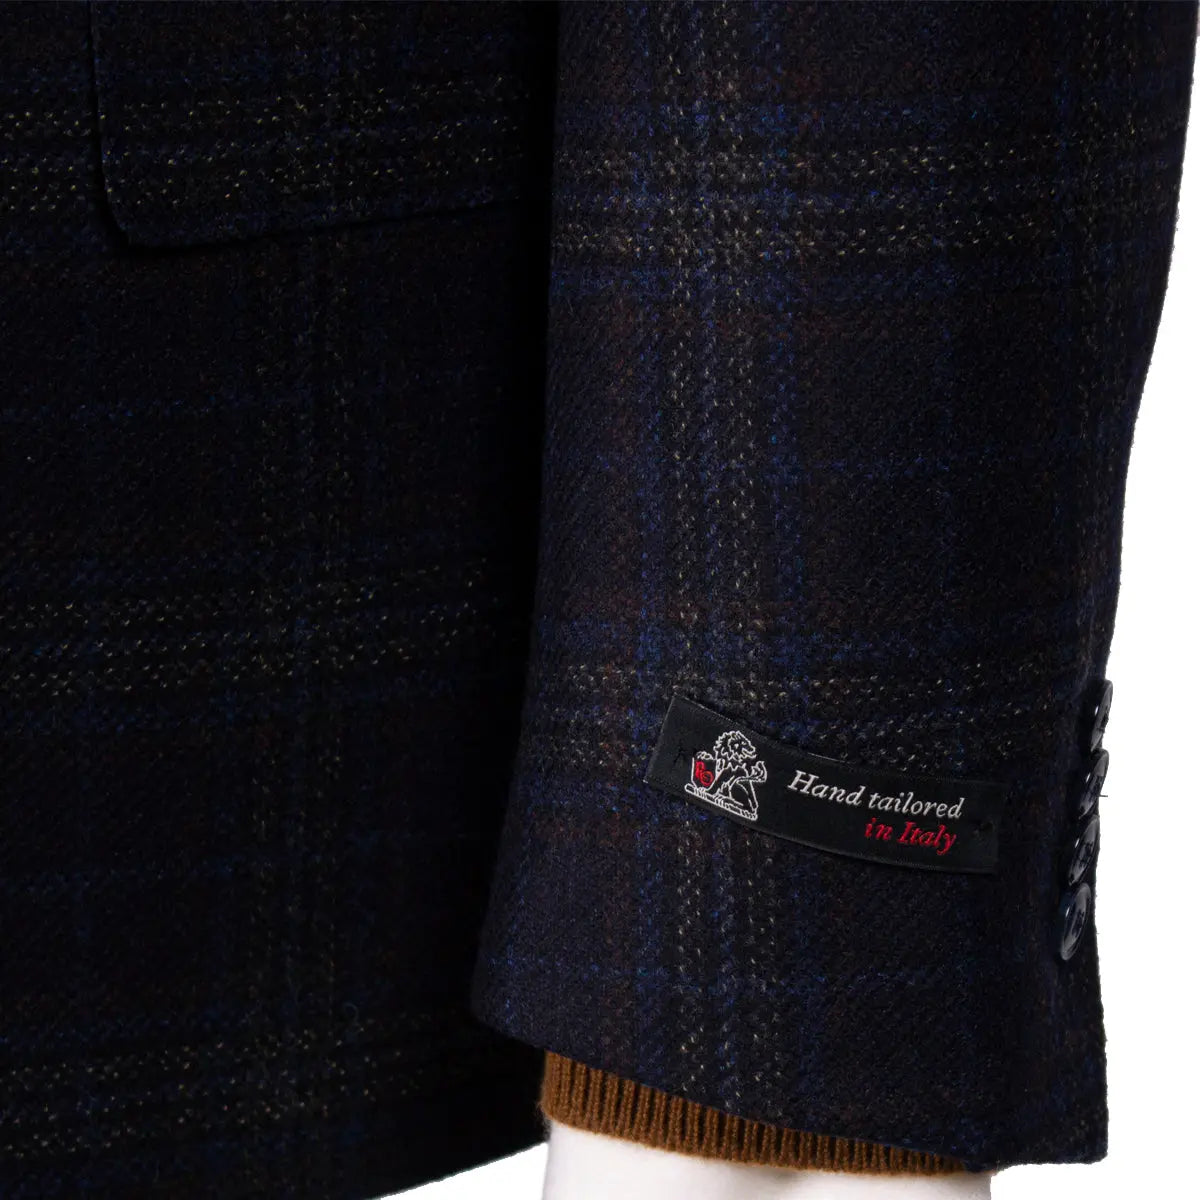 Navy Blue &amp; Brown Check Wool &amp; Cashmere Jacket  Robert Old   